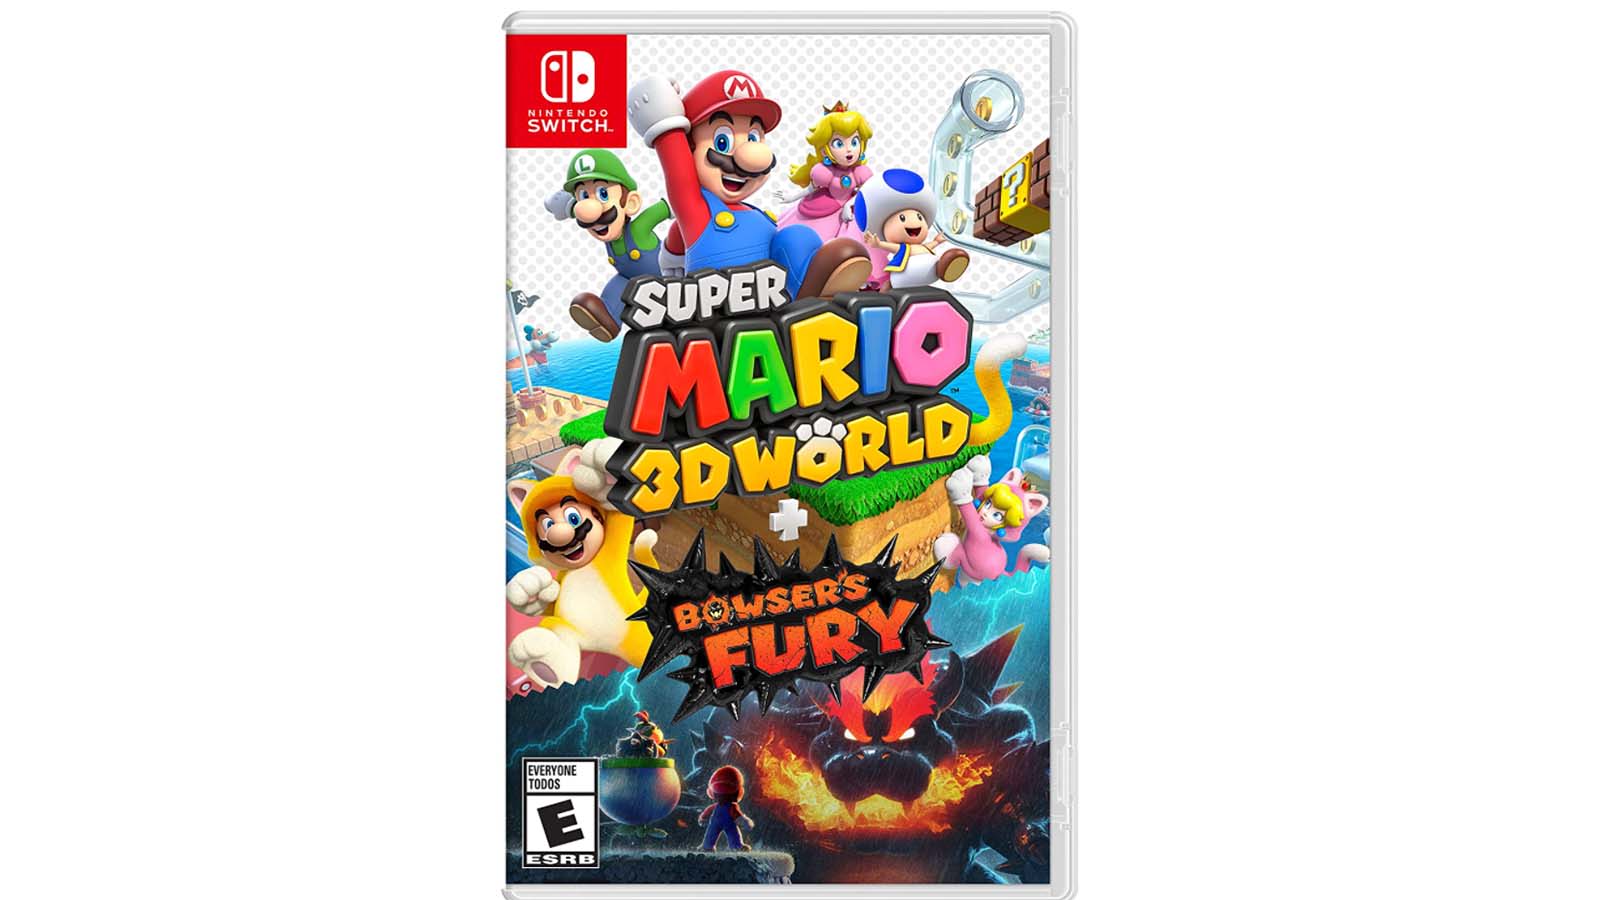 Mario Day 2023: Get 'Mario Kart 8 Deluxe' for 35% off at